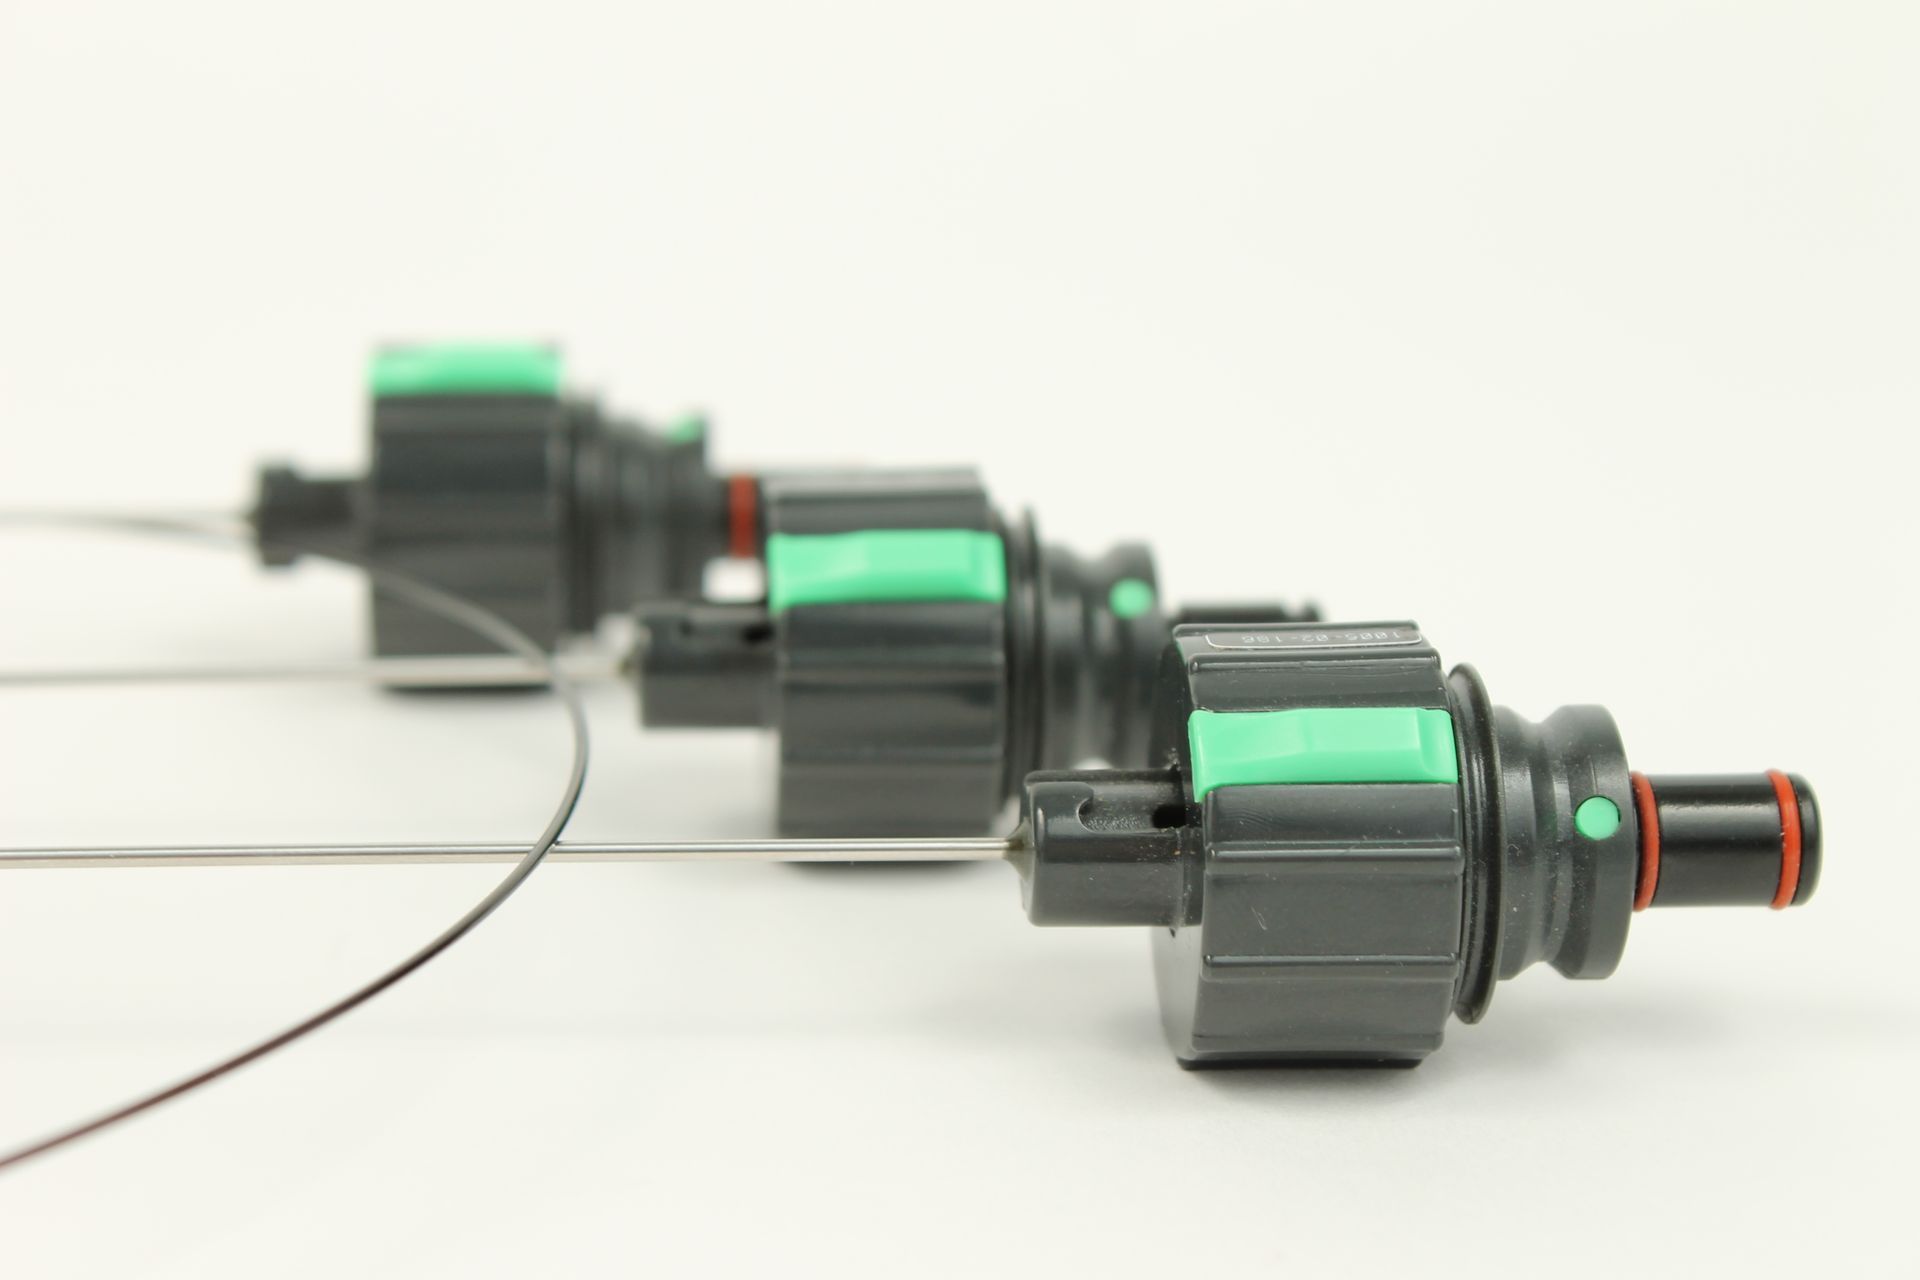 A row of black and green connectors on a white surface